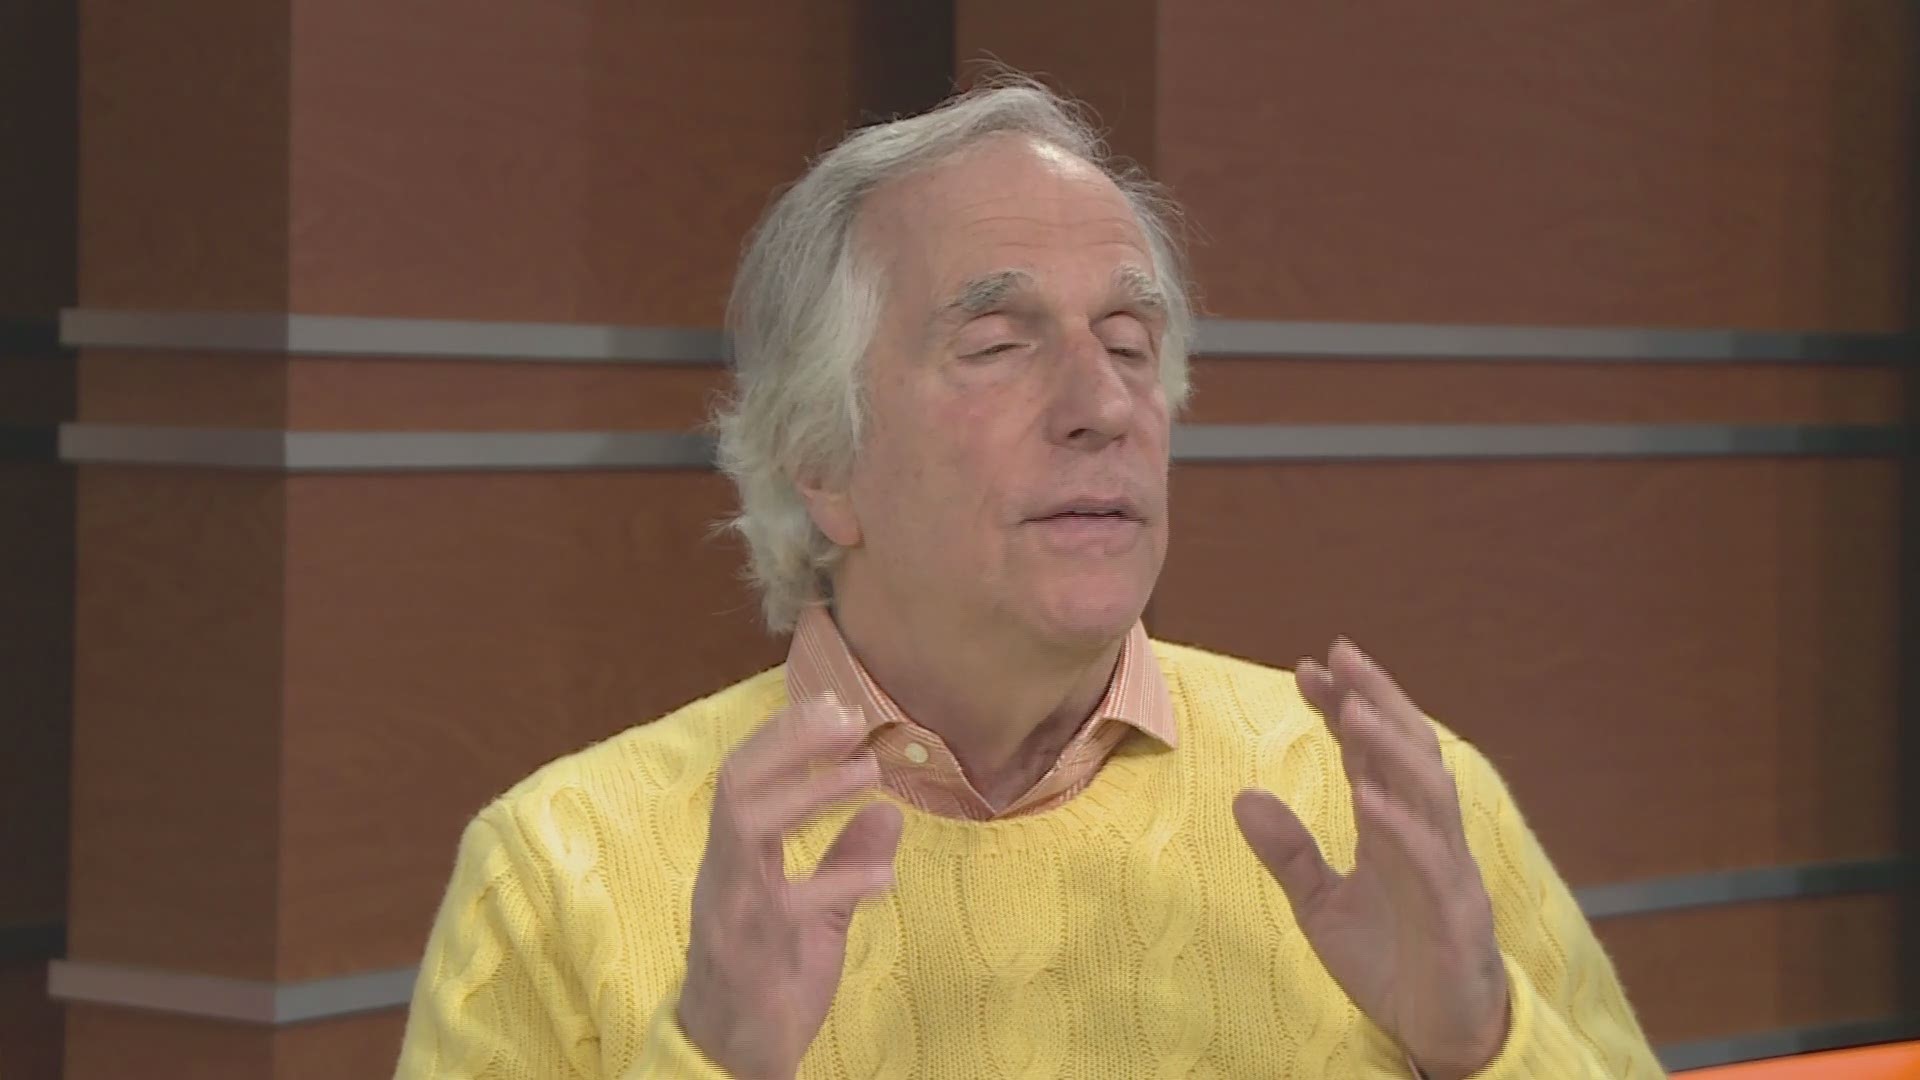 Henry Winkler discusses his HBO show "Barry"